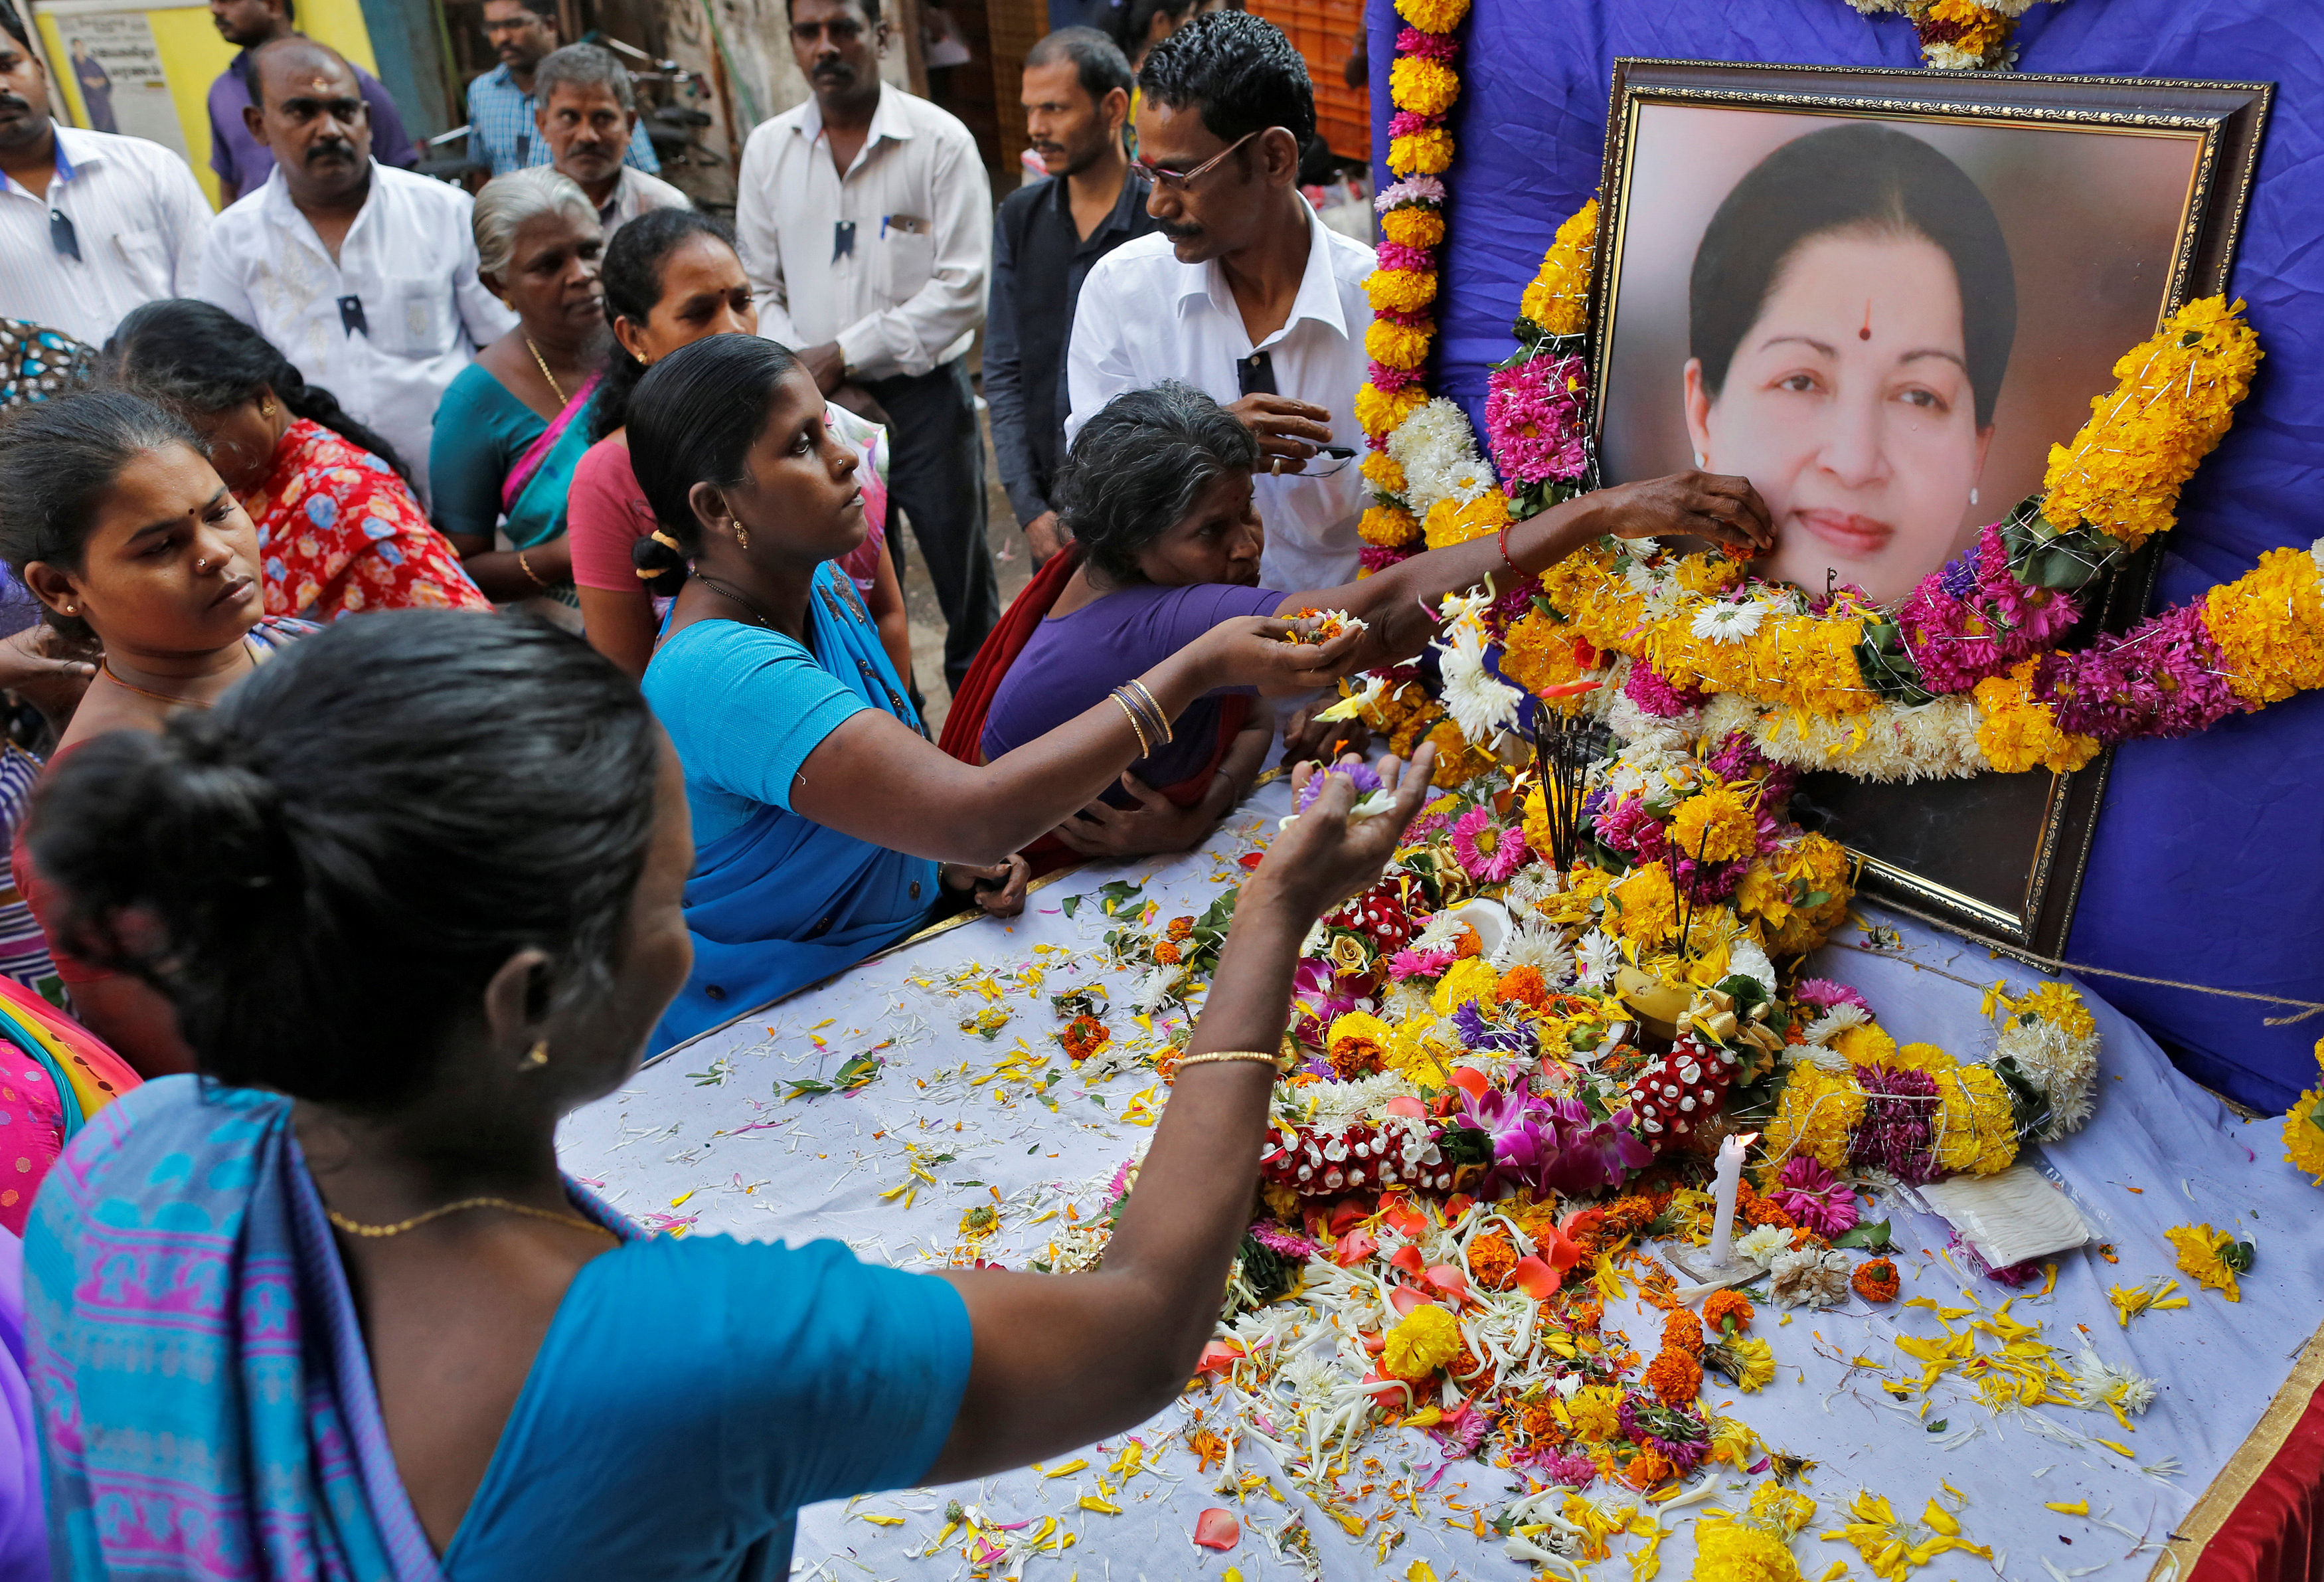 Supporters of J Jayalalithaa attend a prayer ceremony at the AIADMK party office in Mumbai. Reuters